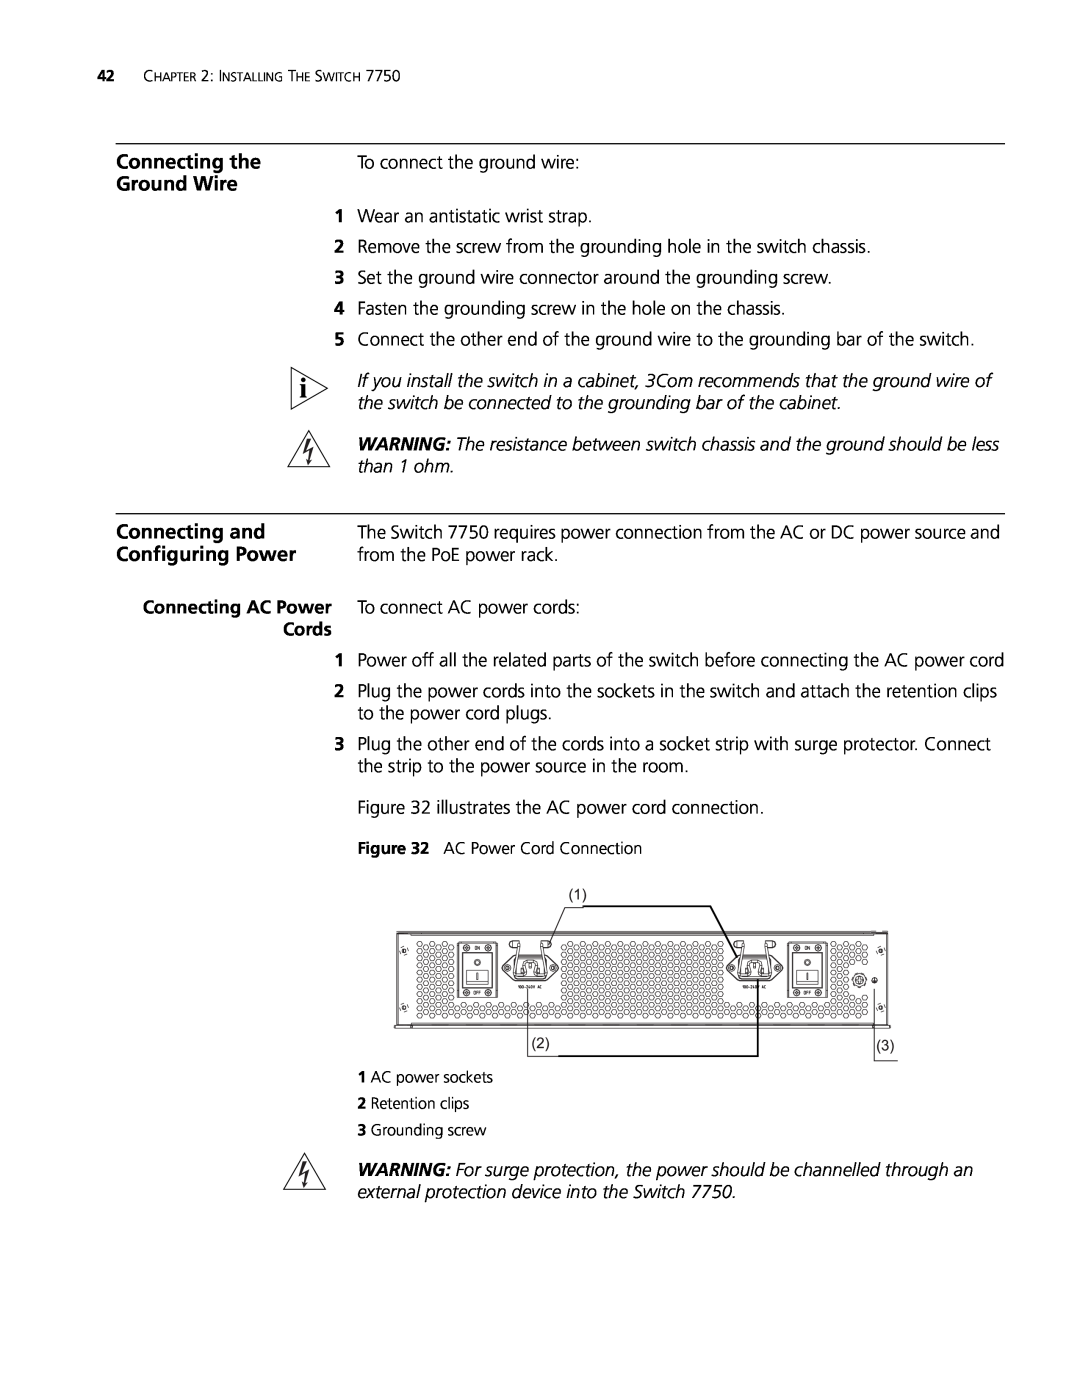 3Com 3C16896 8 slot AC Chassis manual Connecting the, Ground Wire, Connecting and, Configuring Power, Cords 